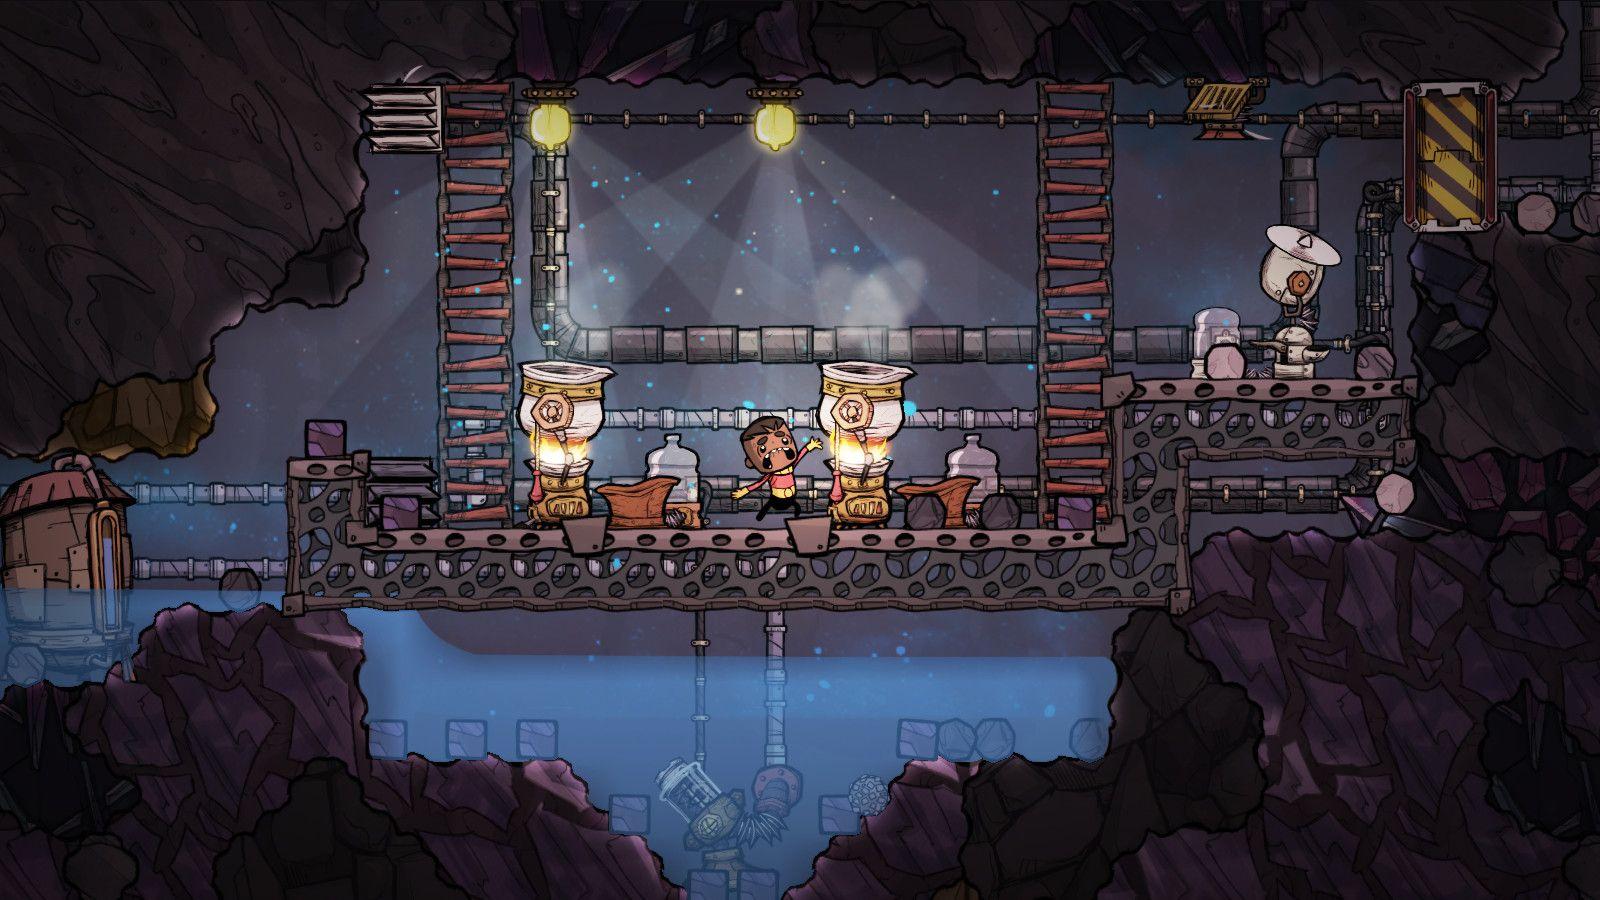 Oxygen Not Included download the new version for android